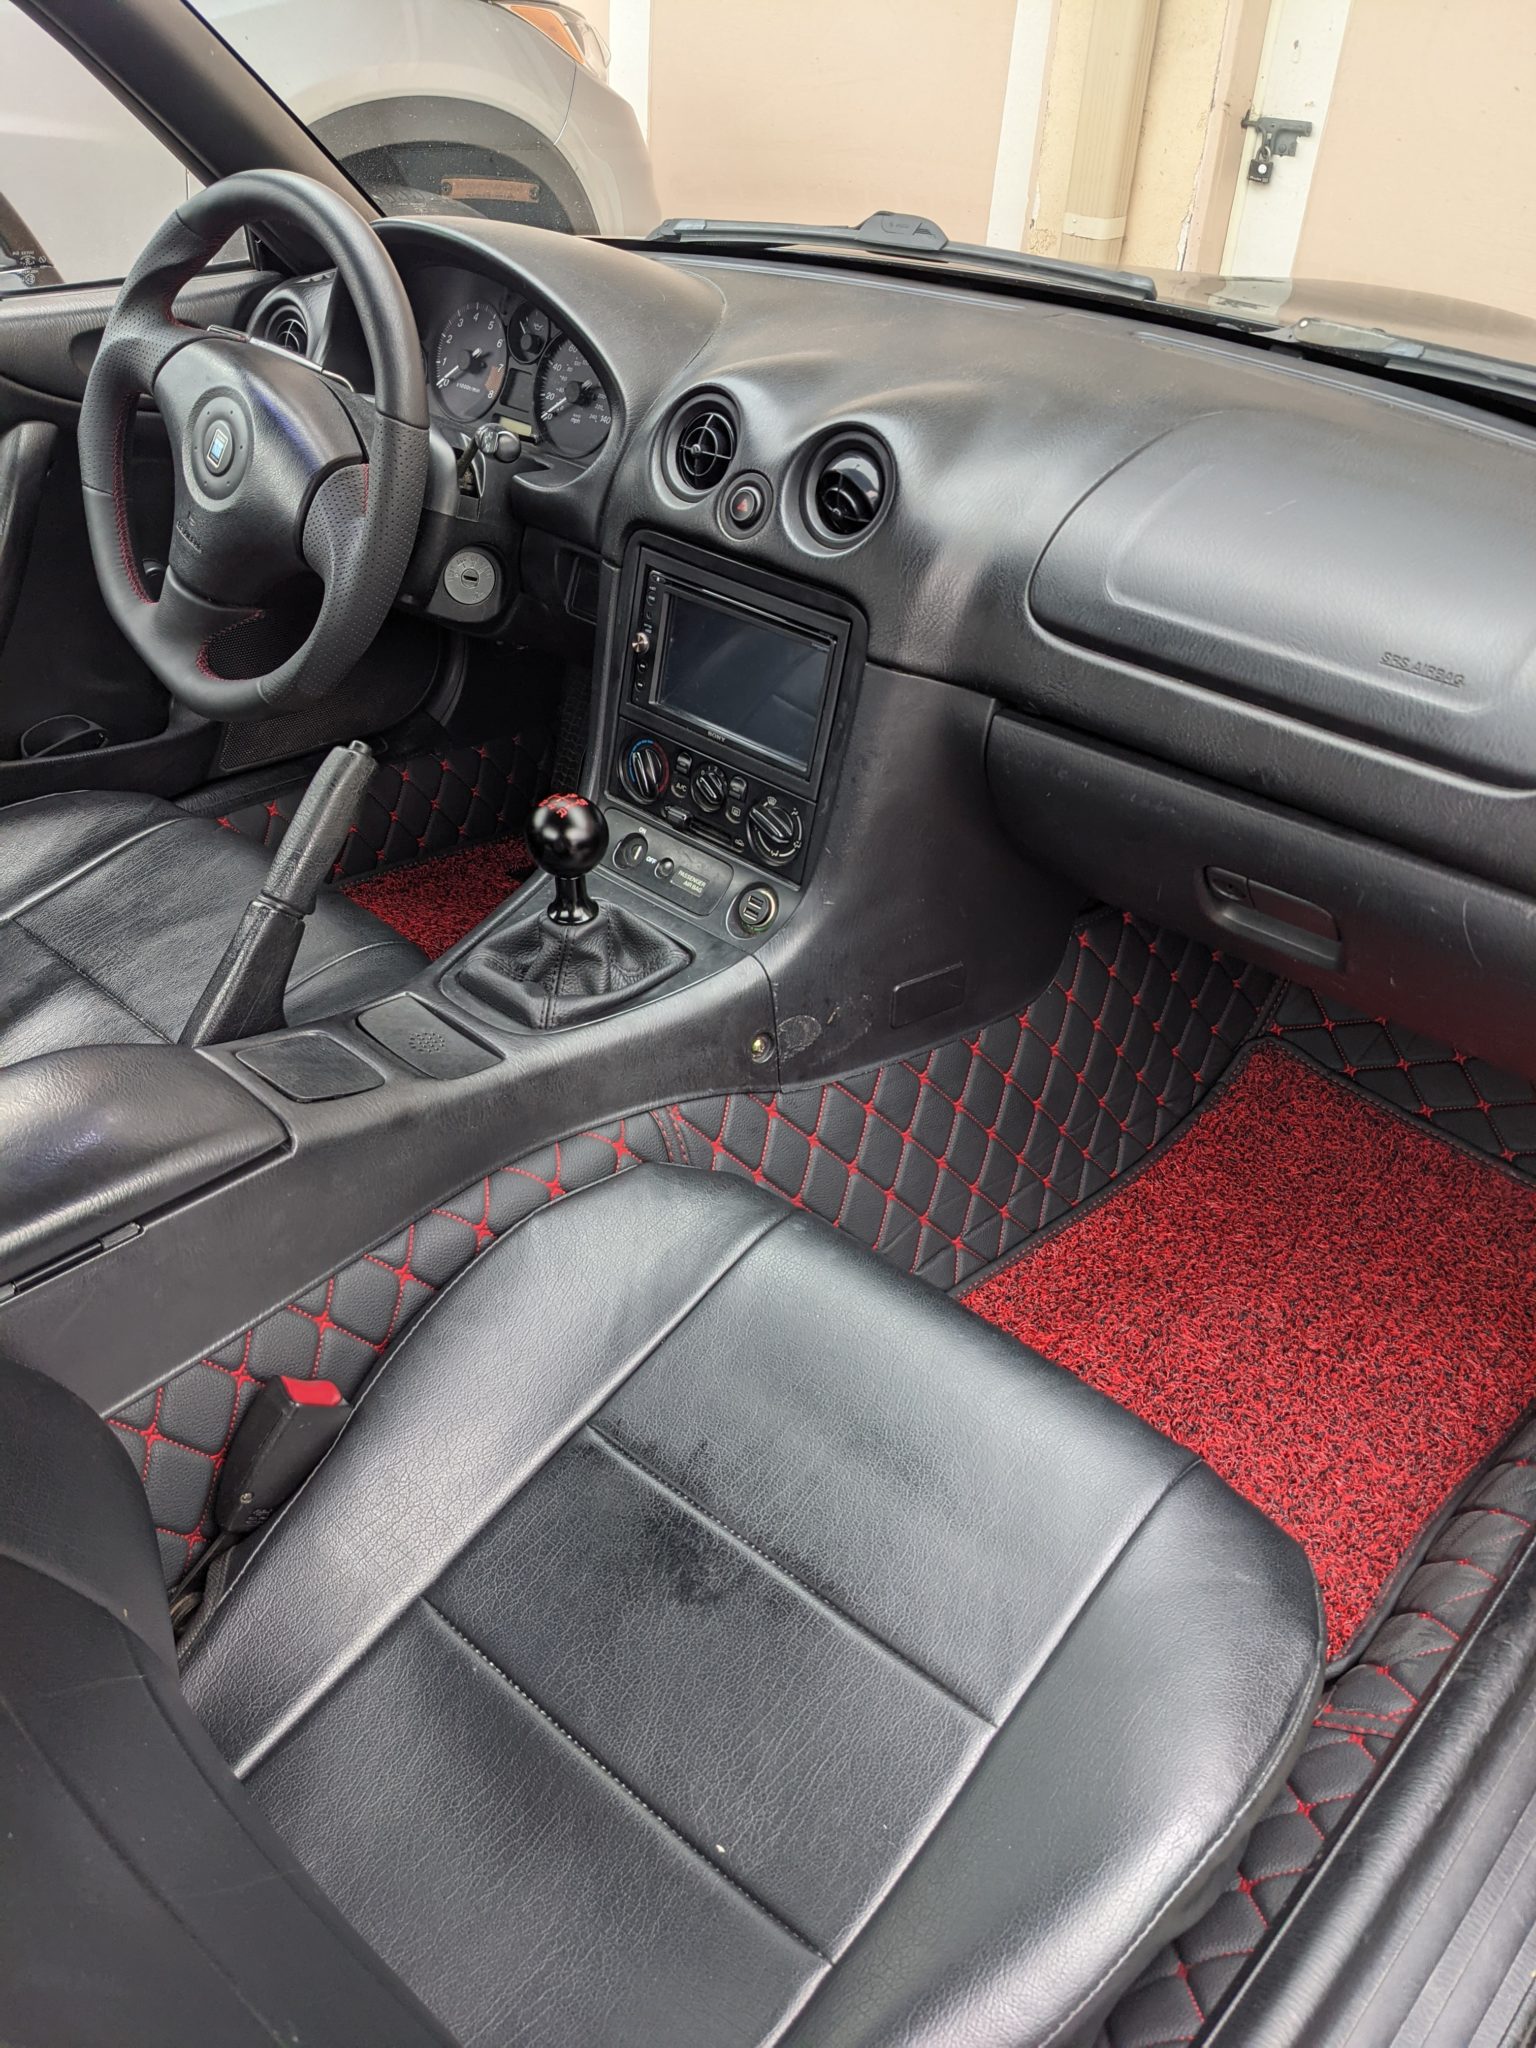 Quilted Floor Mats Deluxe Version Premade Material For Miata Na Nb The Ultimate Resource Mazda Parts